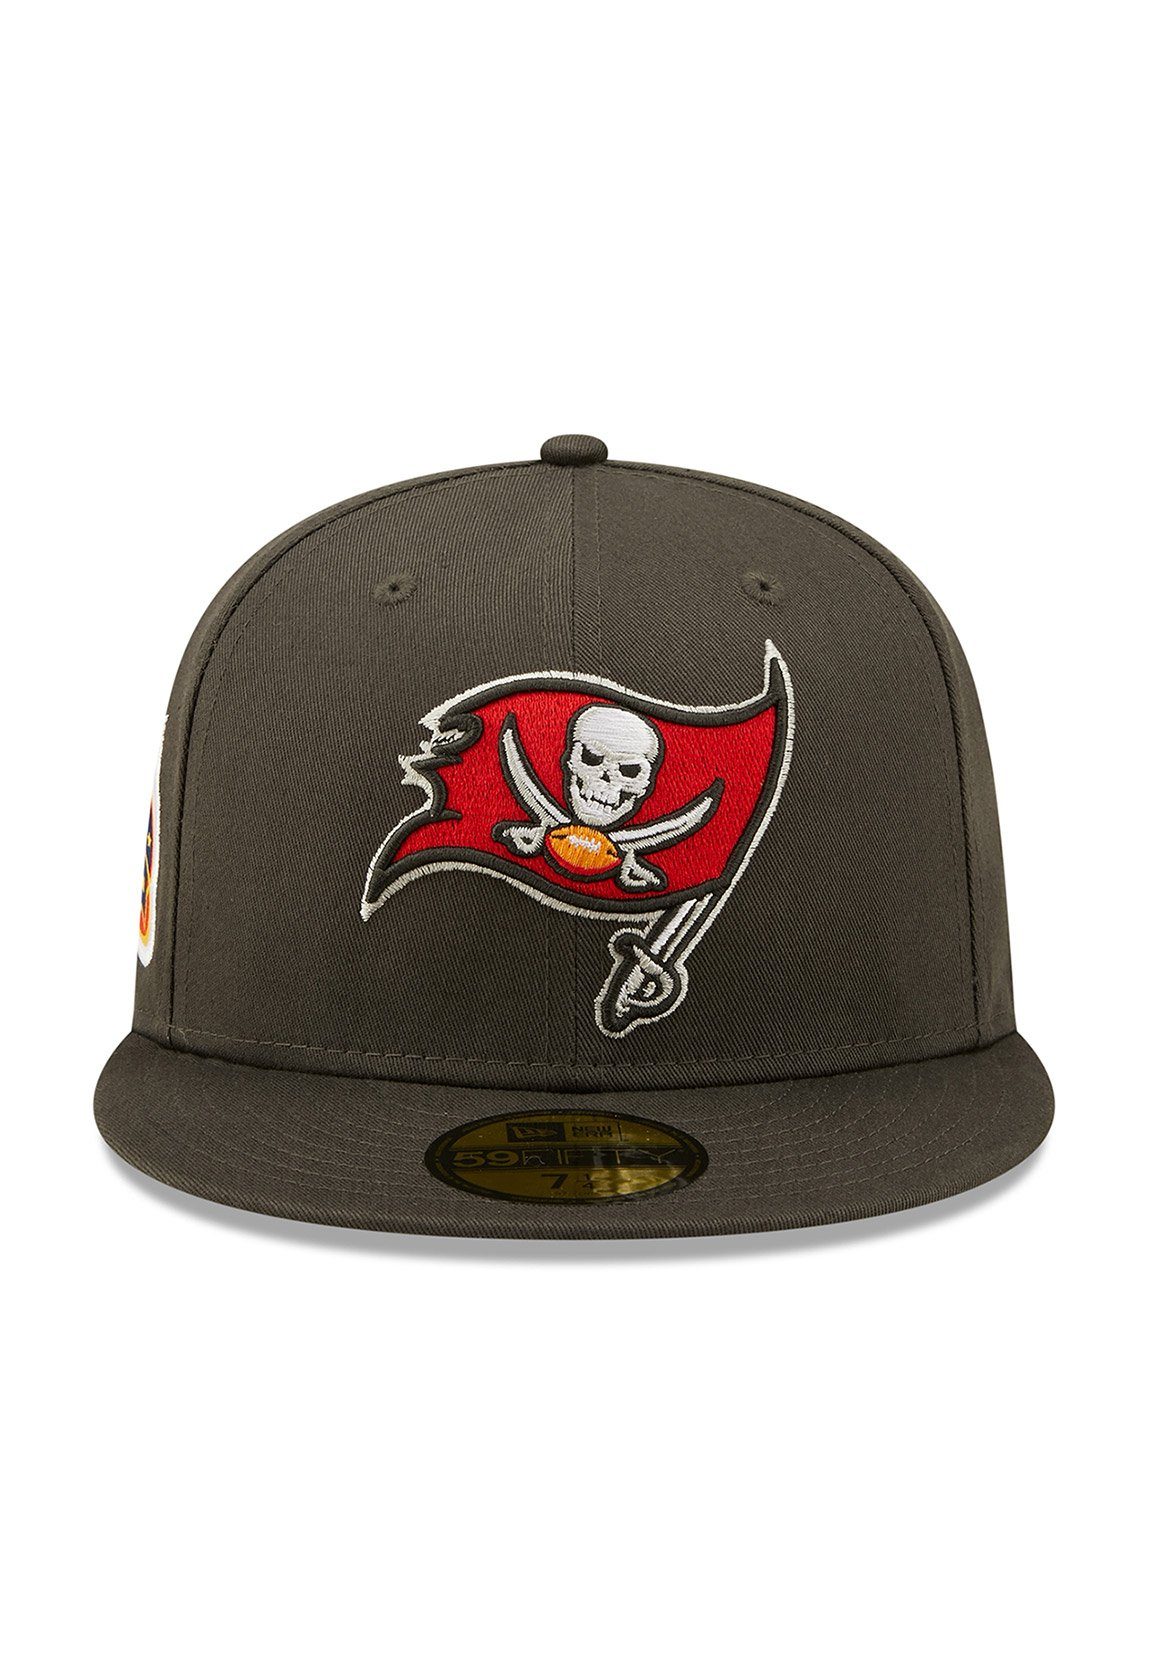 New Era Fitted Cap Side 59Fifty New Grau TAMPA BUCCANEERS BAY Patch Charcoal